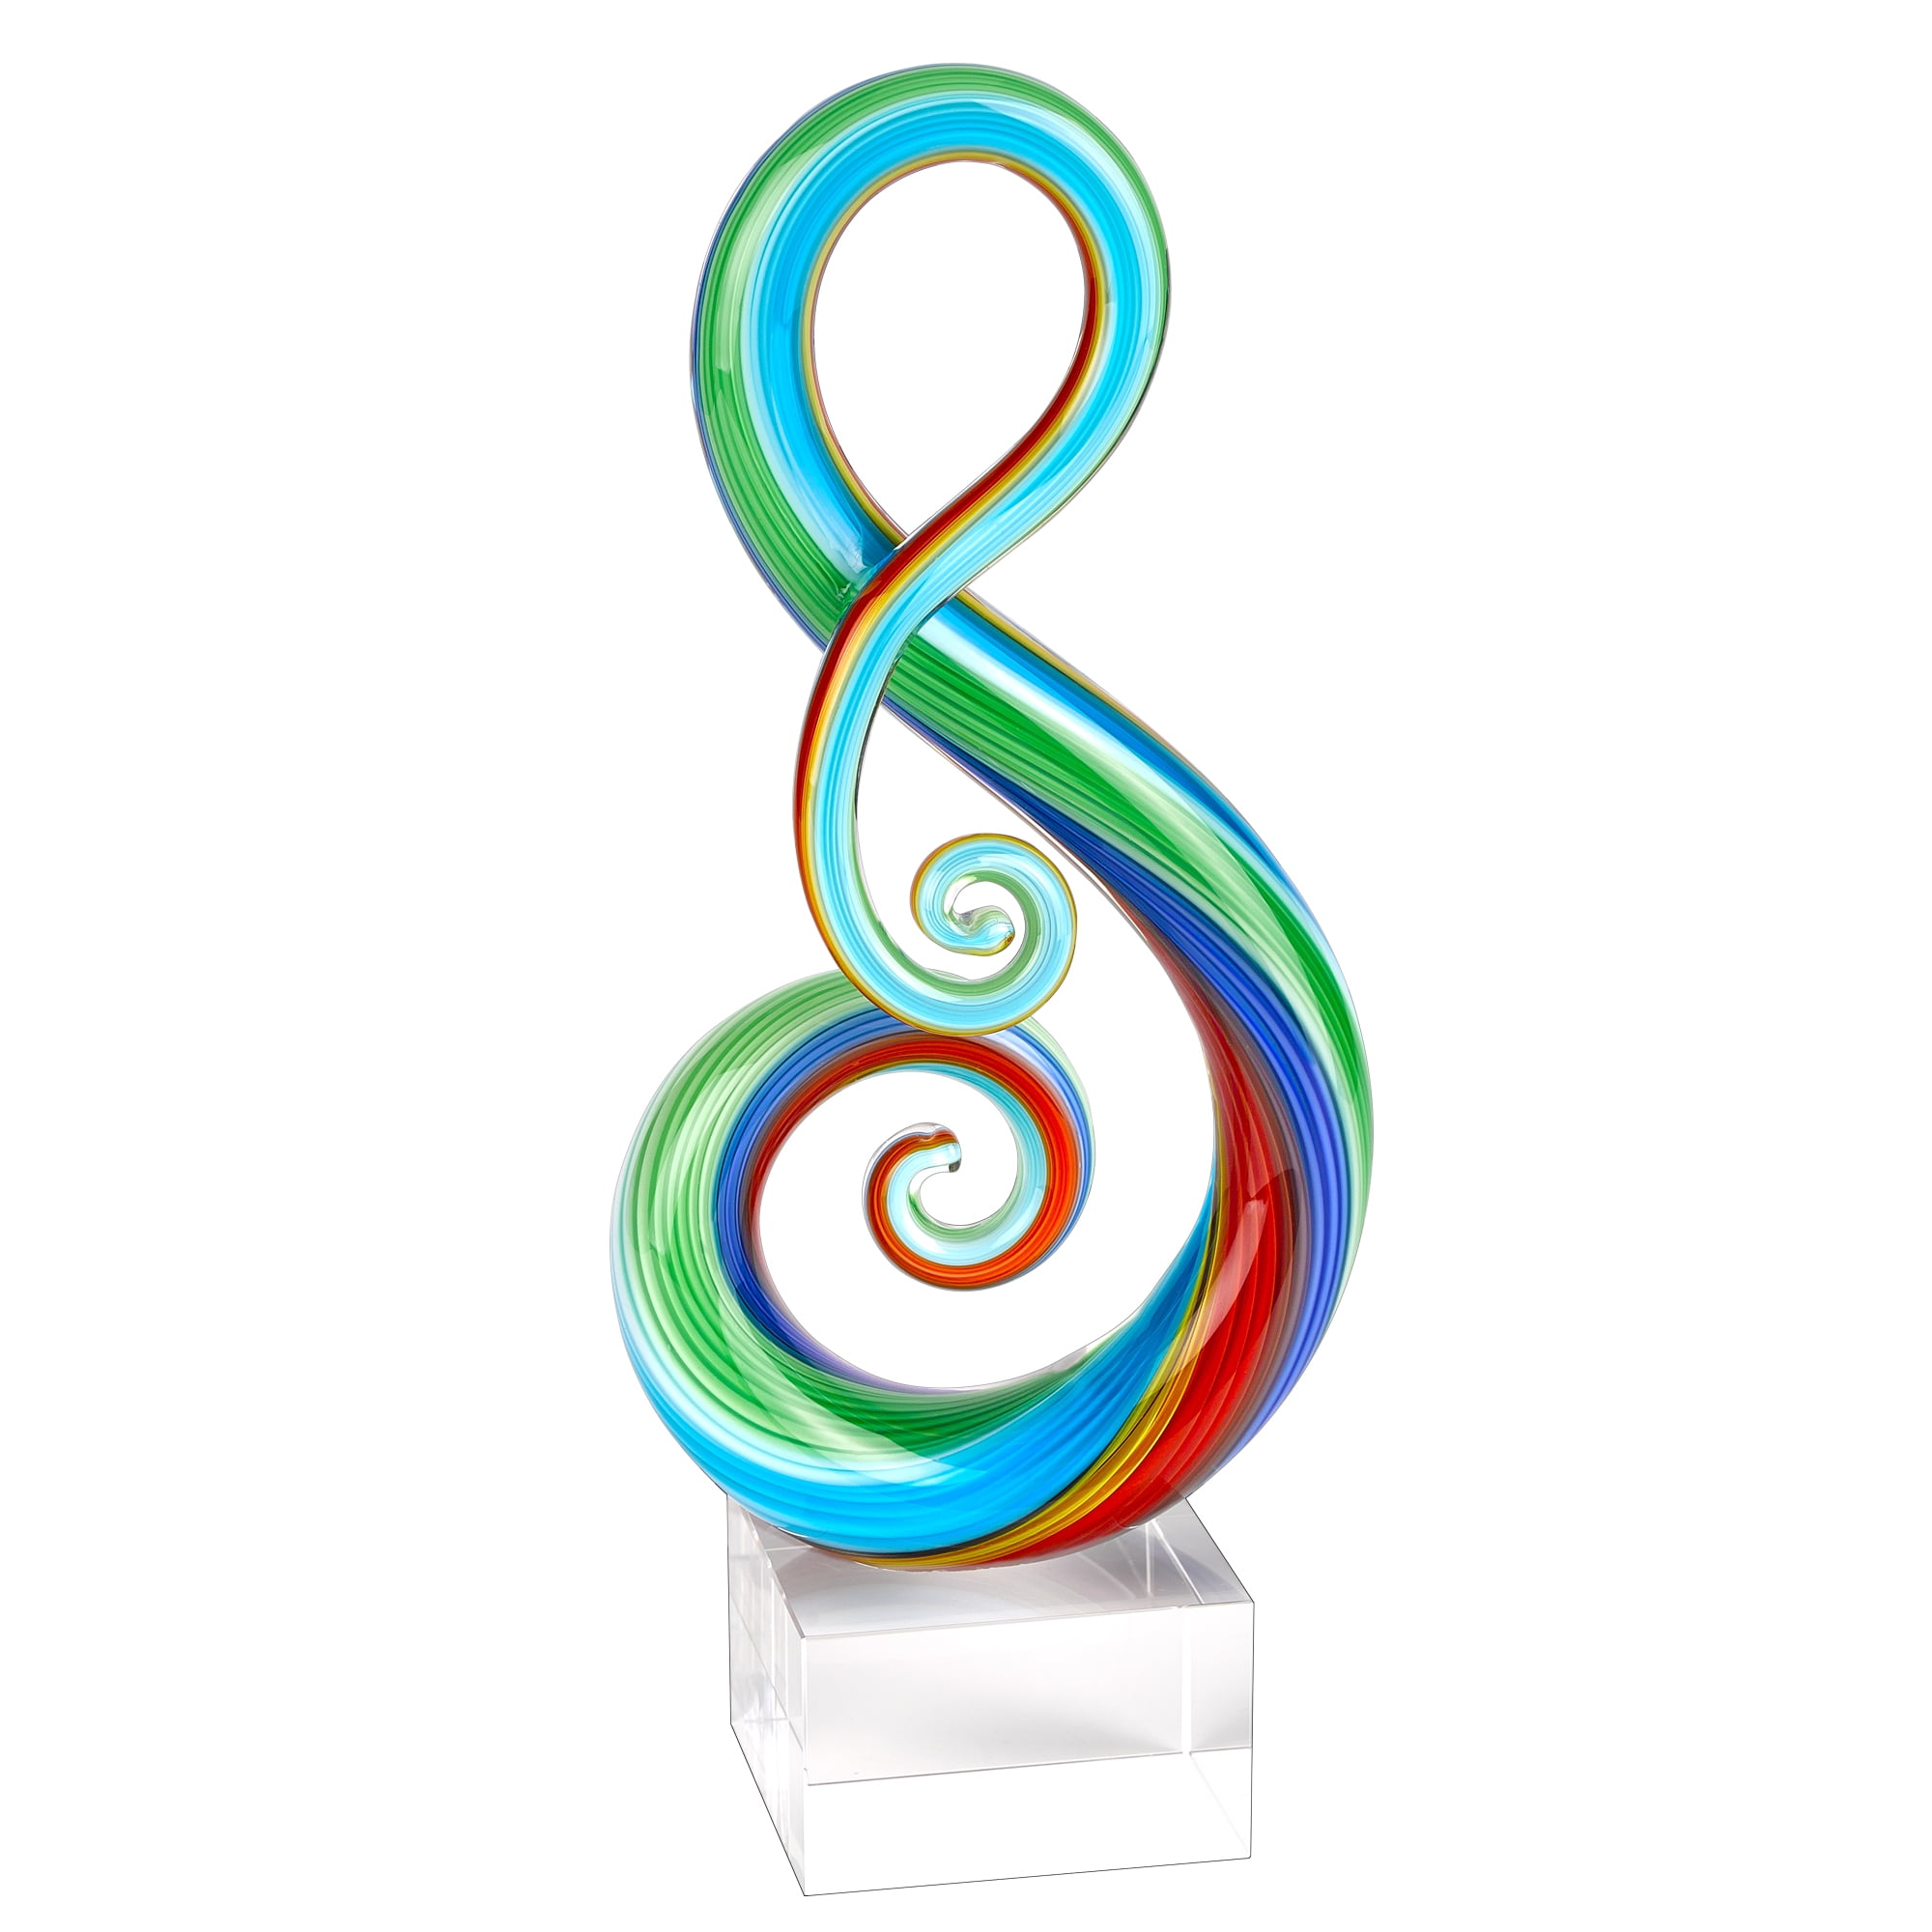 Home Office Tabletop Decorations Handmade Murano Art Figurine Birthday Present Hand Blown Glass Spiral 2 Tone Blue and Green Crystal Seaside Swirl Ornaments Gift for Christmas Green and Blue 